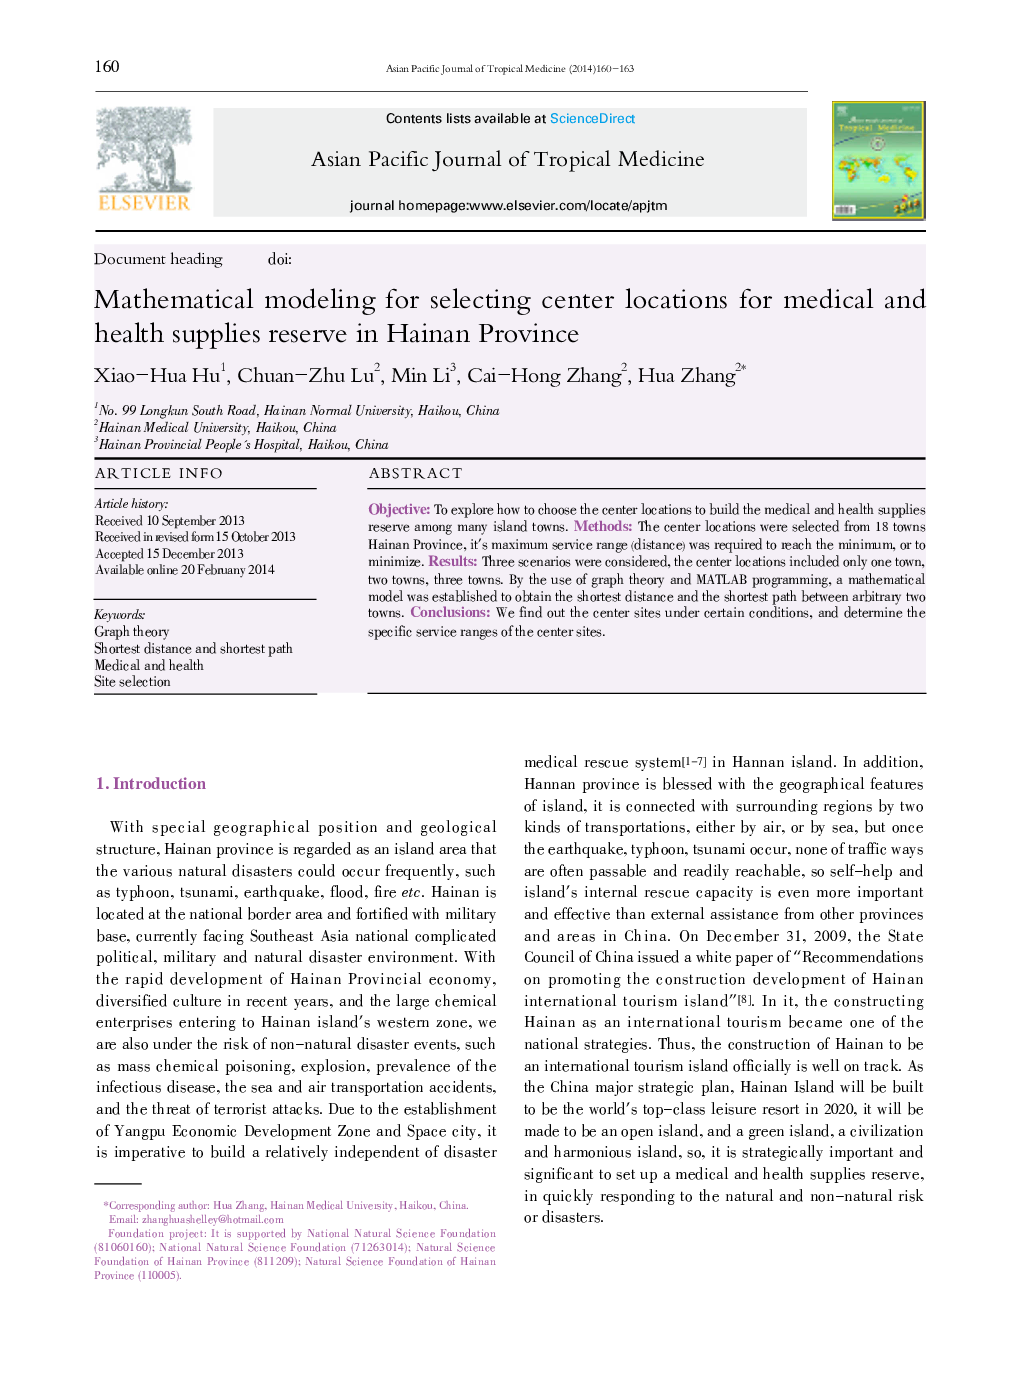 Mathematical modeling for selecting center locations for medical and health supplies reserve in Hainan Province 